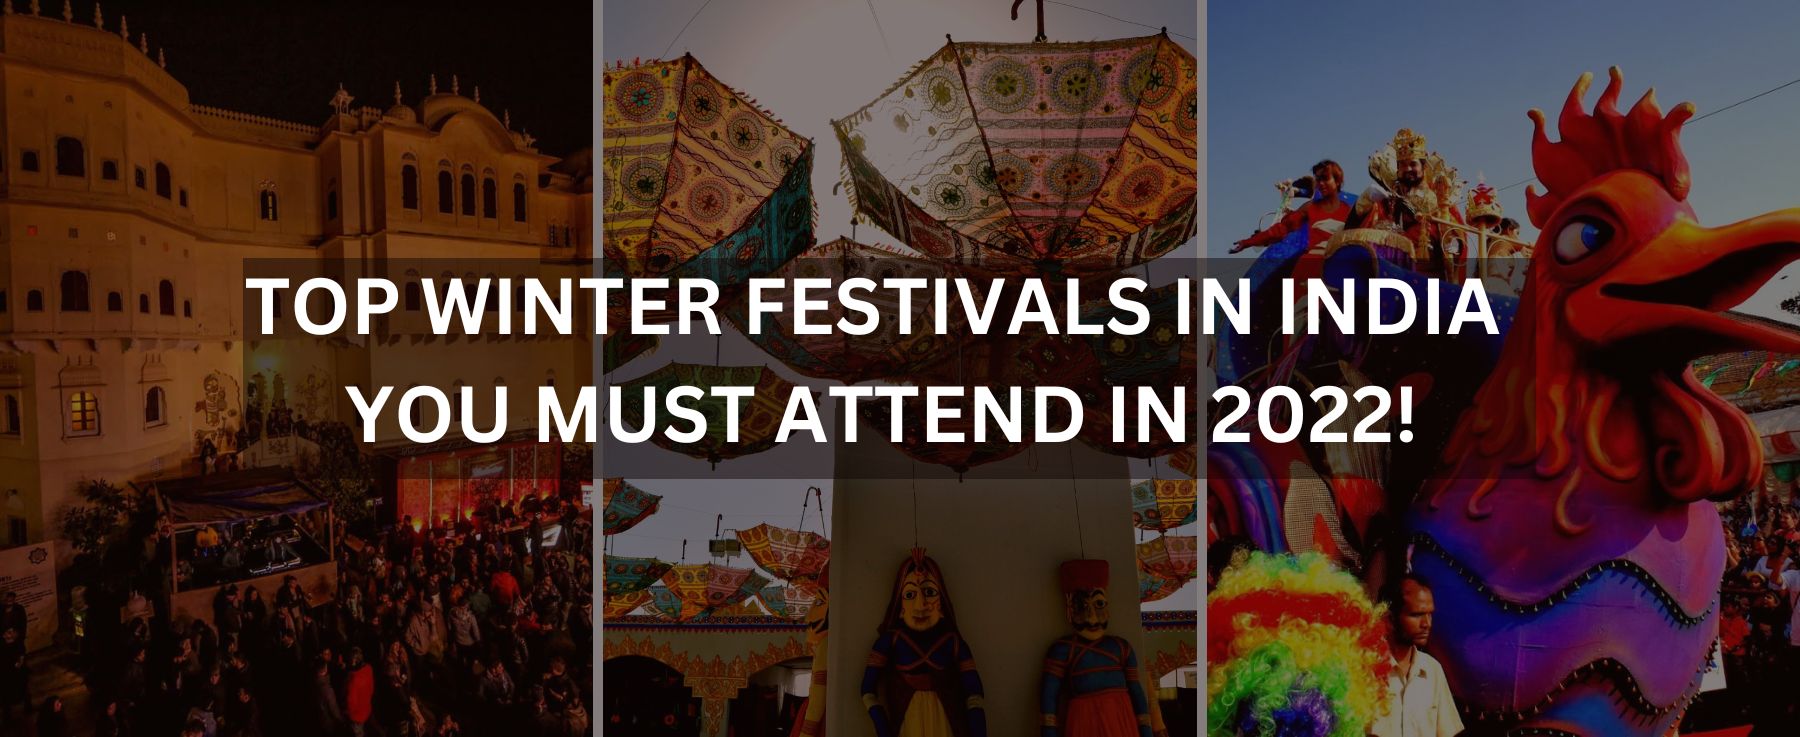 Top Winter Festivals In India You Must Attend 